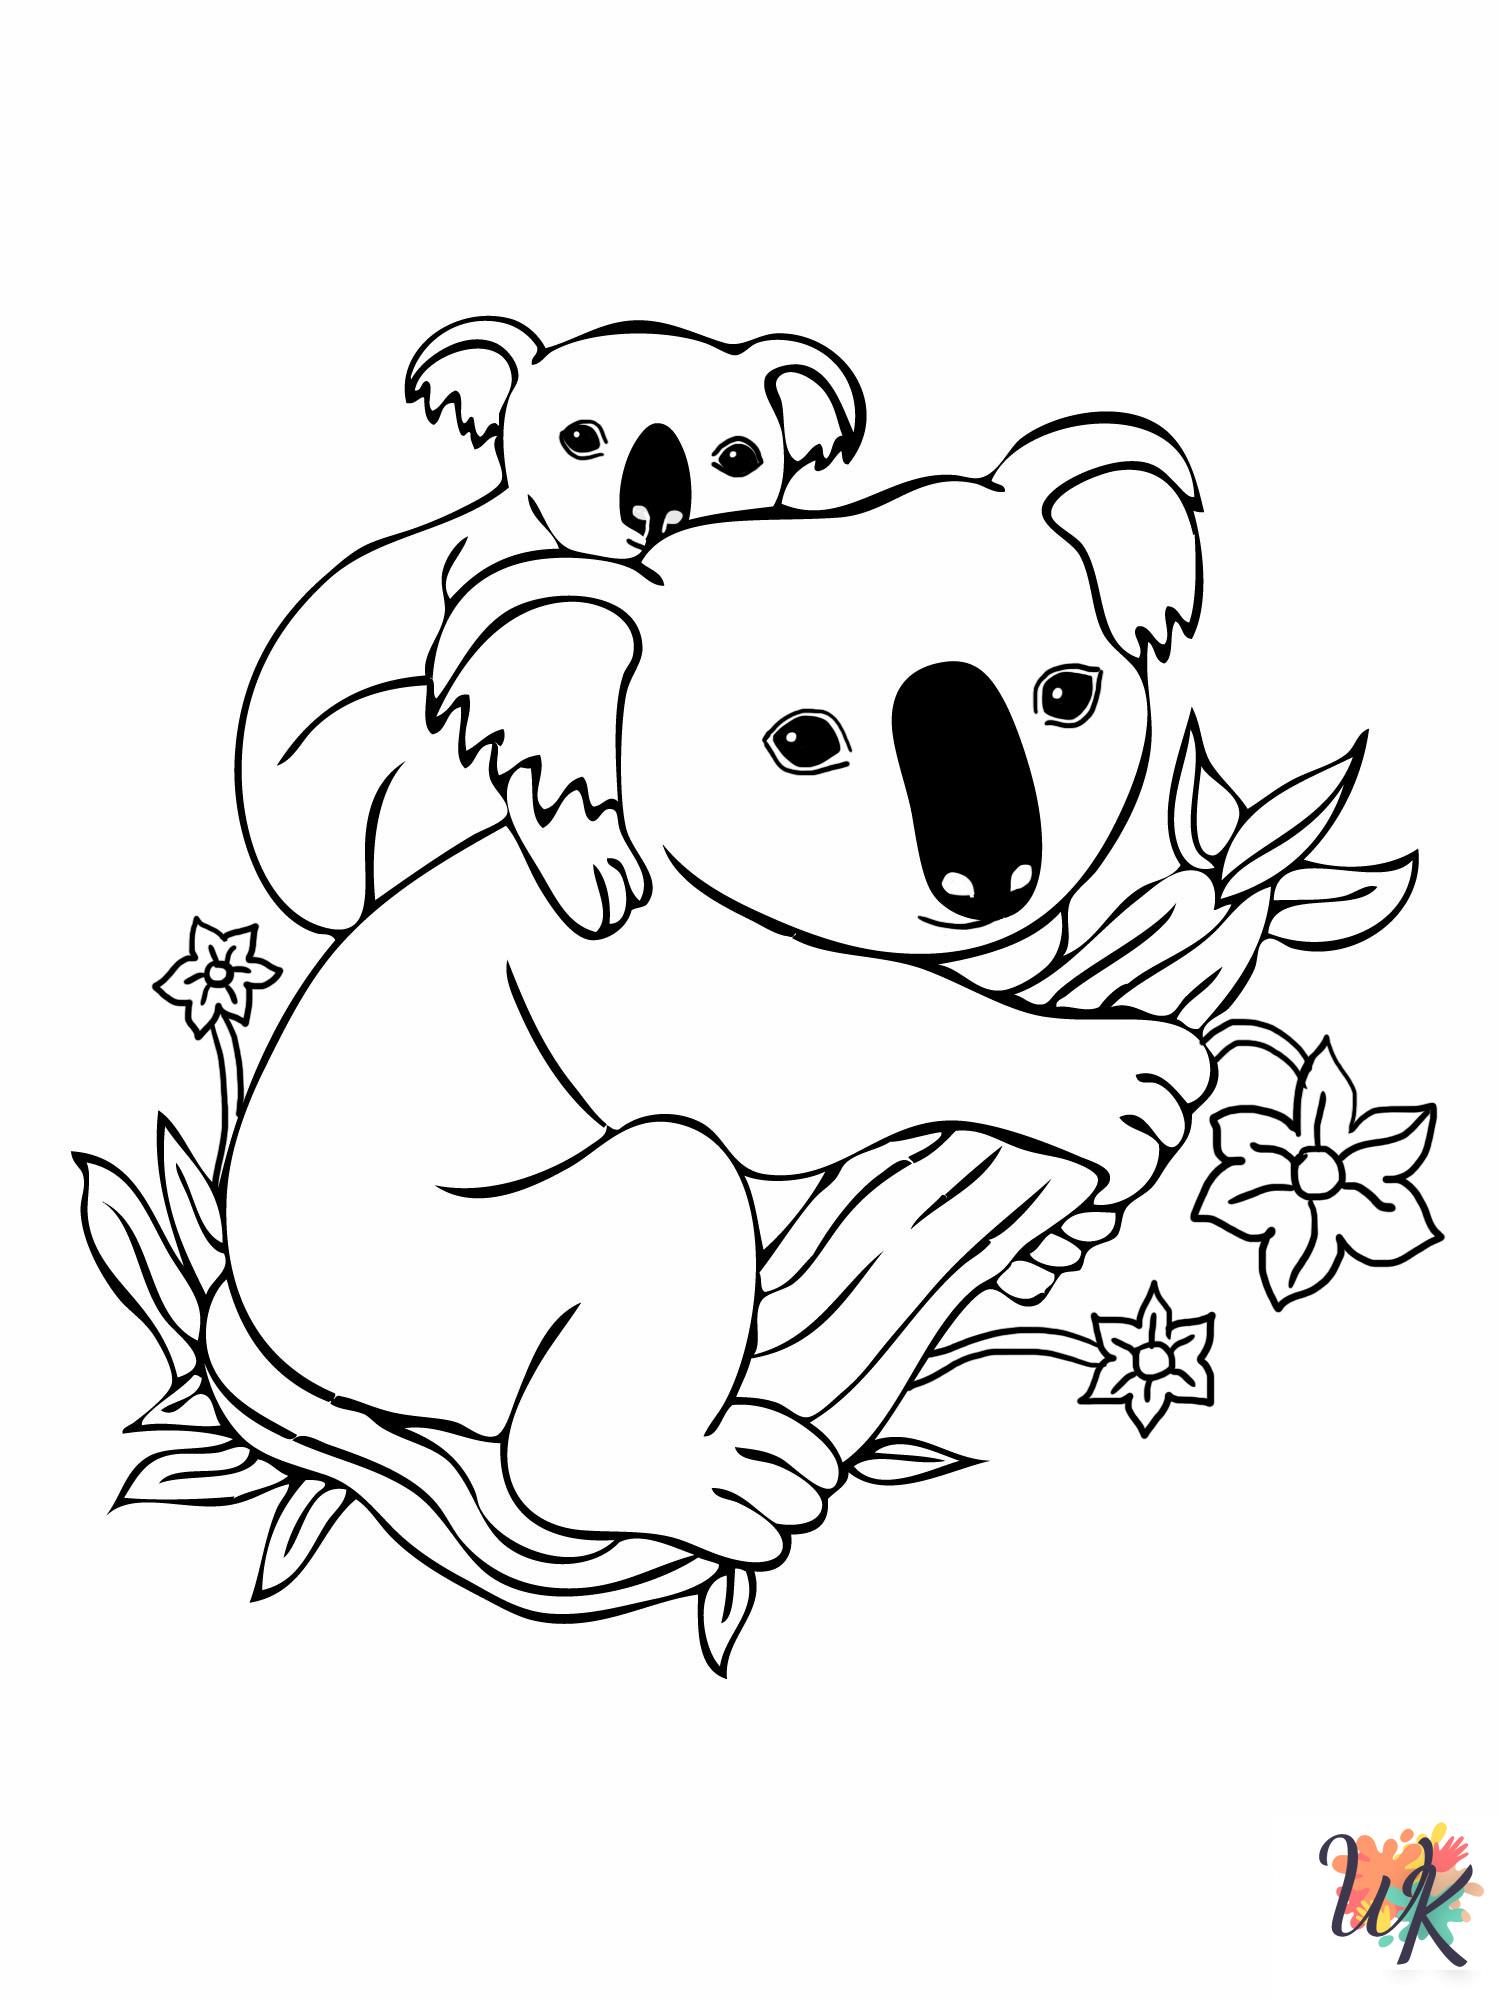 Koala coloring pages for adults pdf